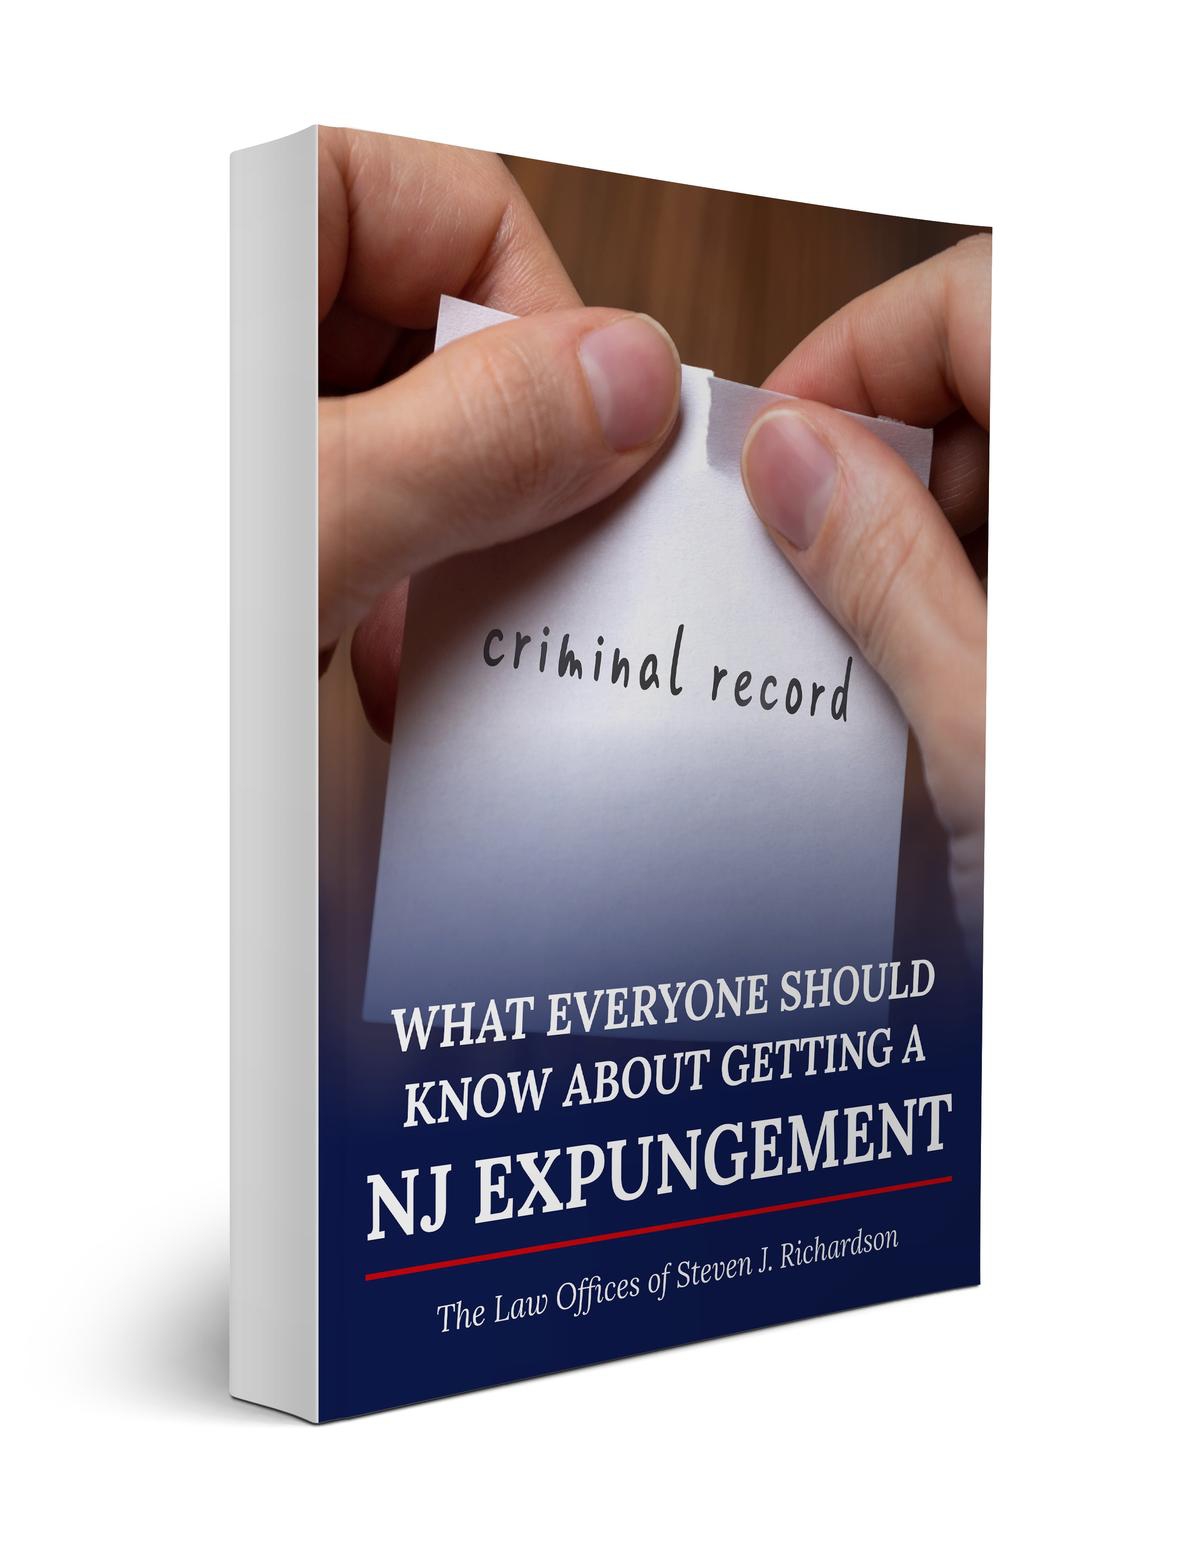 What Everyone Should Know About Getting a NJ Expungement